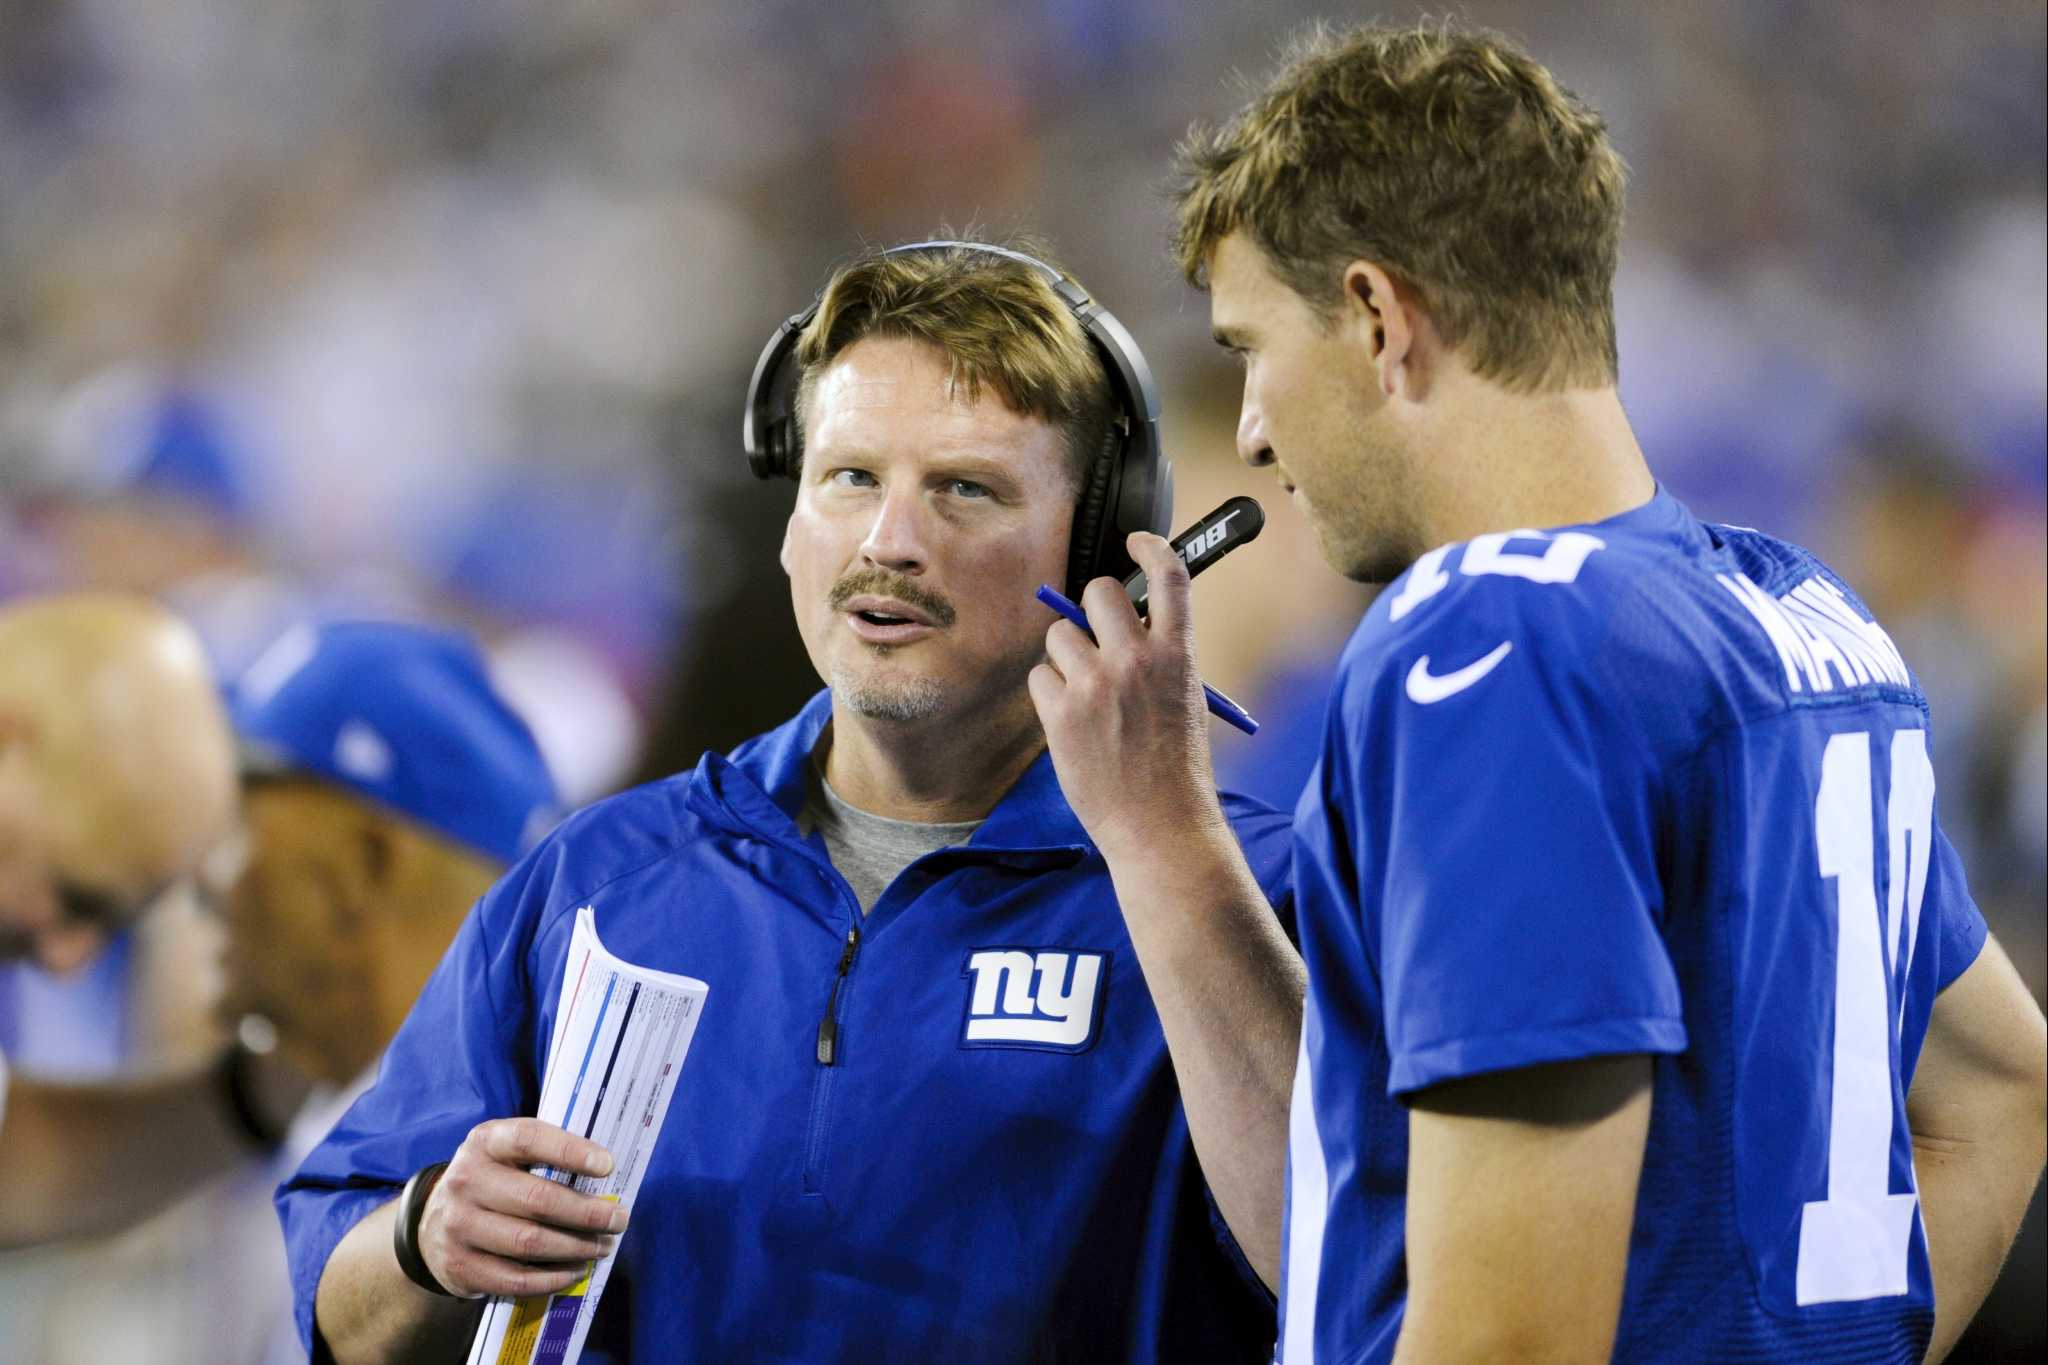 Debut day arrives for Giants coach Ben McAdoo, Cowboys' rookies